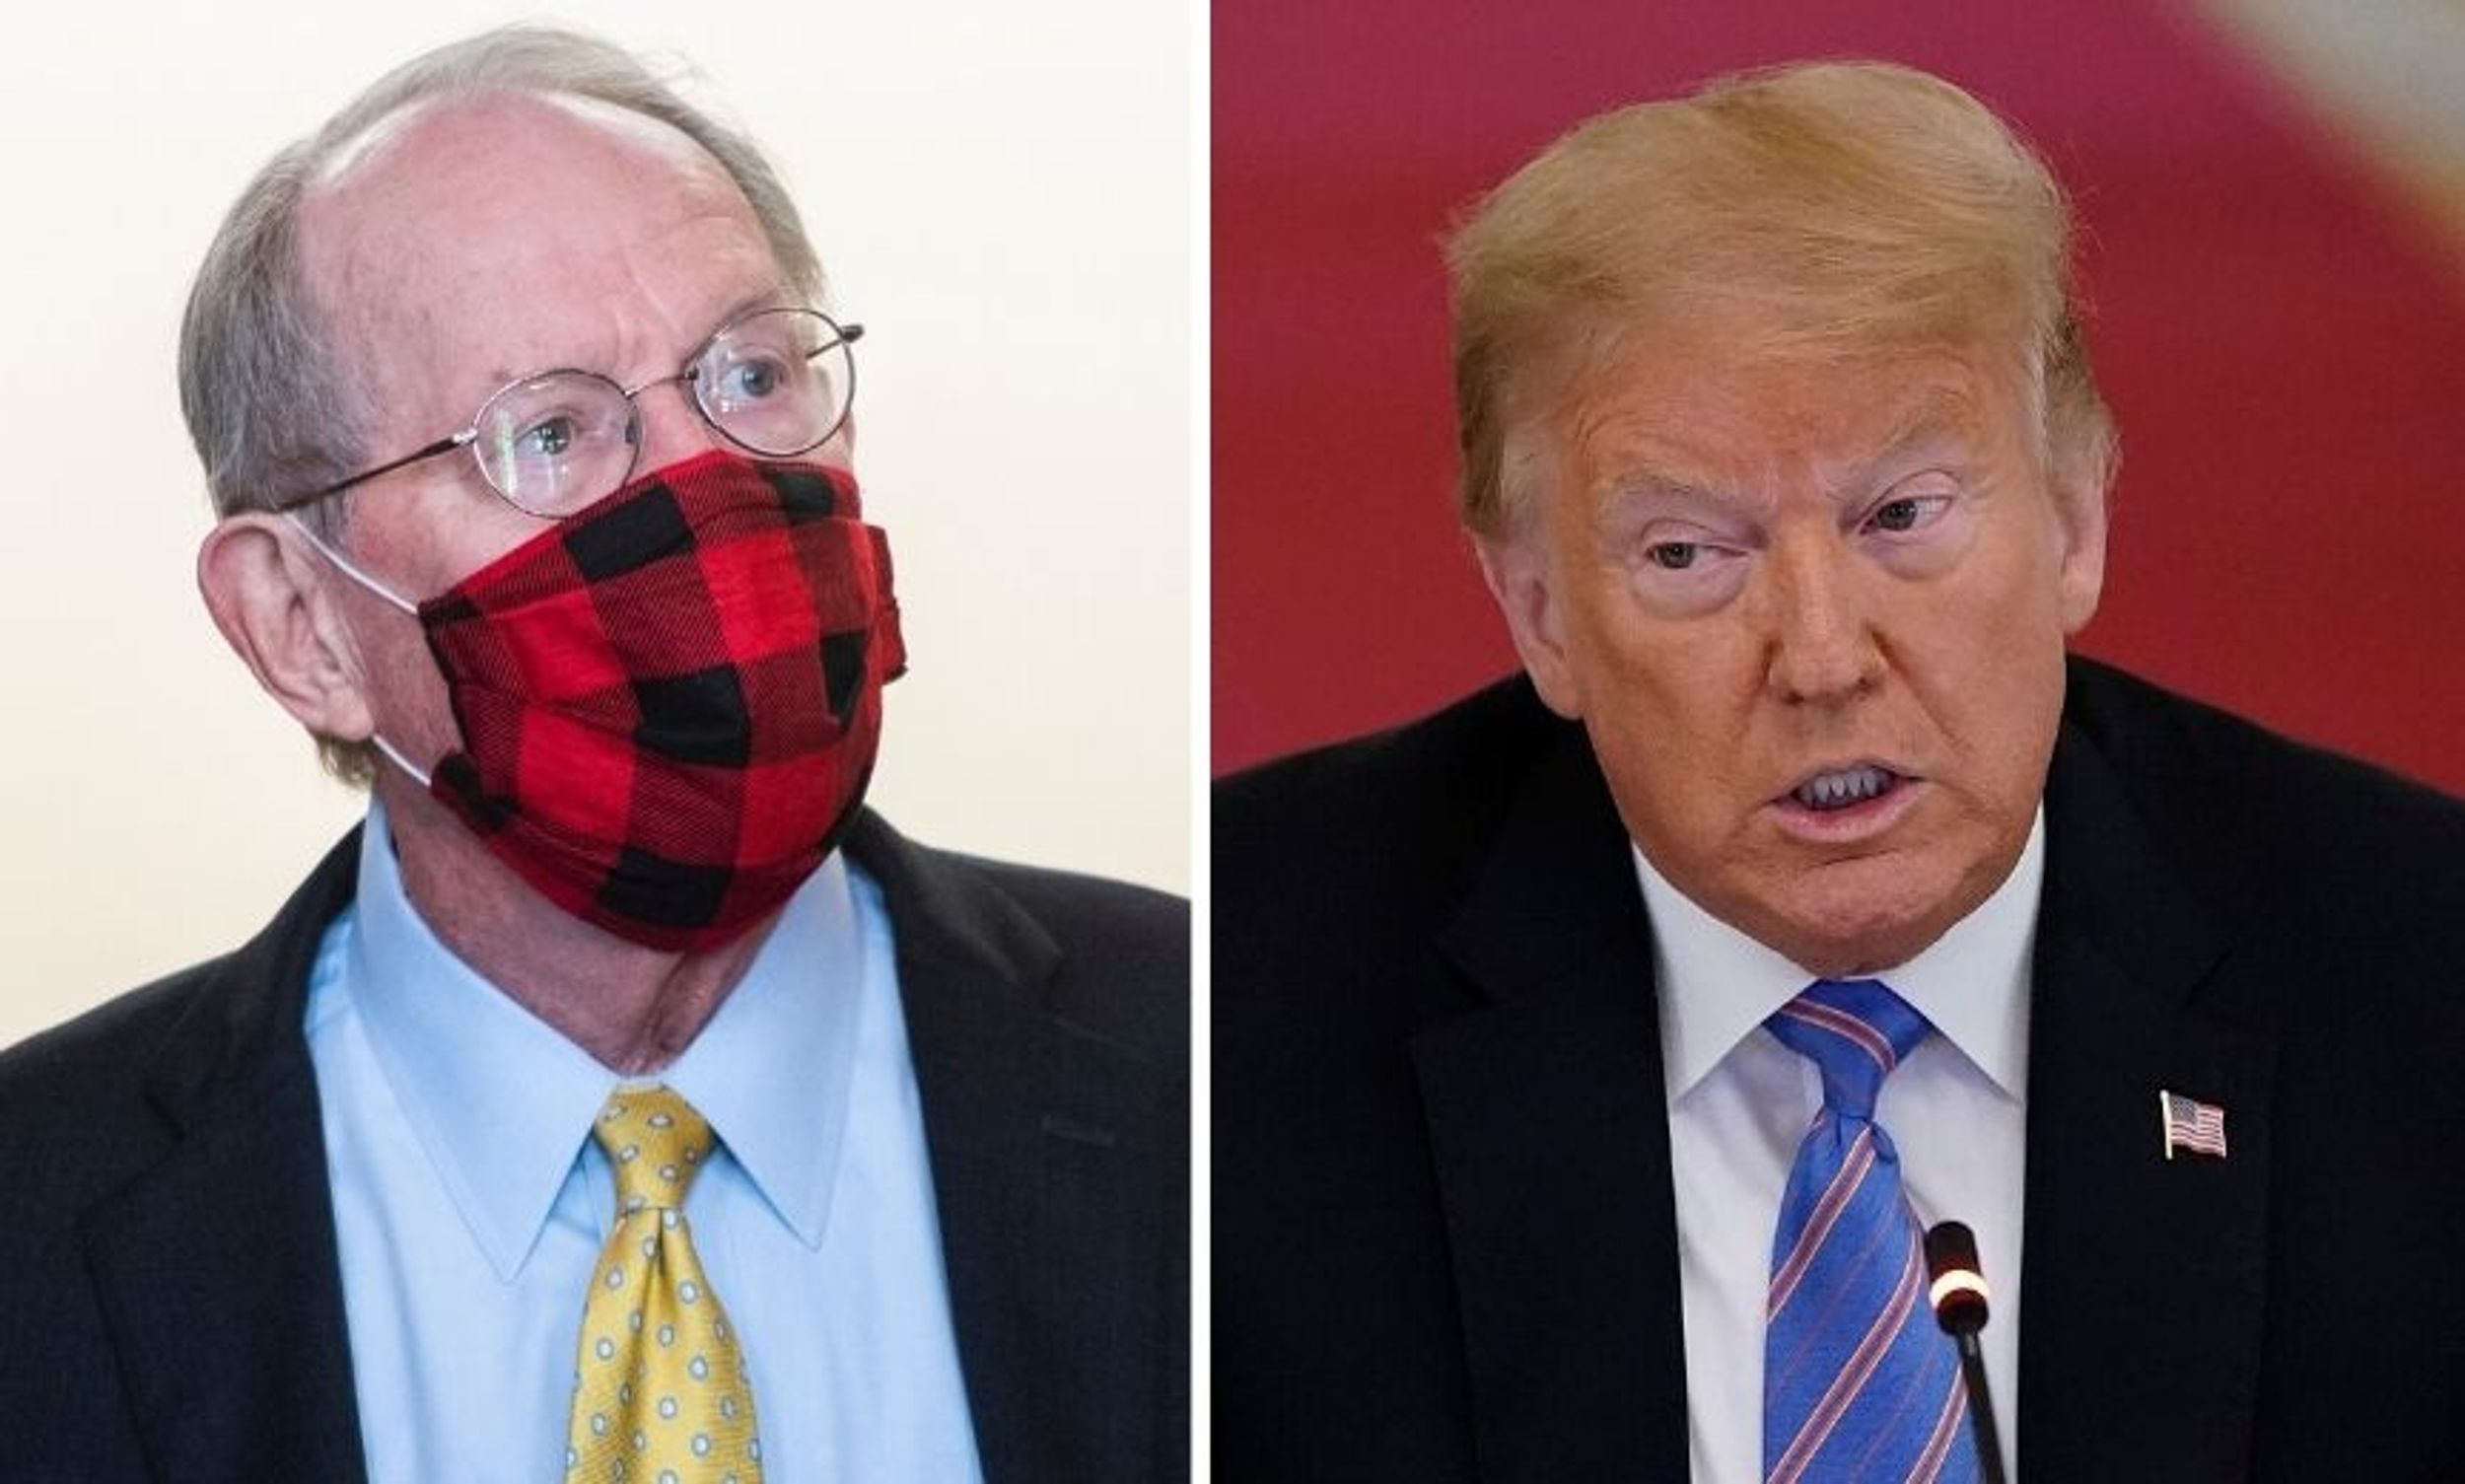 Republican Senator Now Says He Thinks 'It Would Help' If Trump Wore a Mask 'From Time to Time'